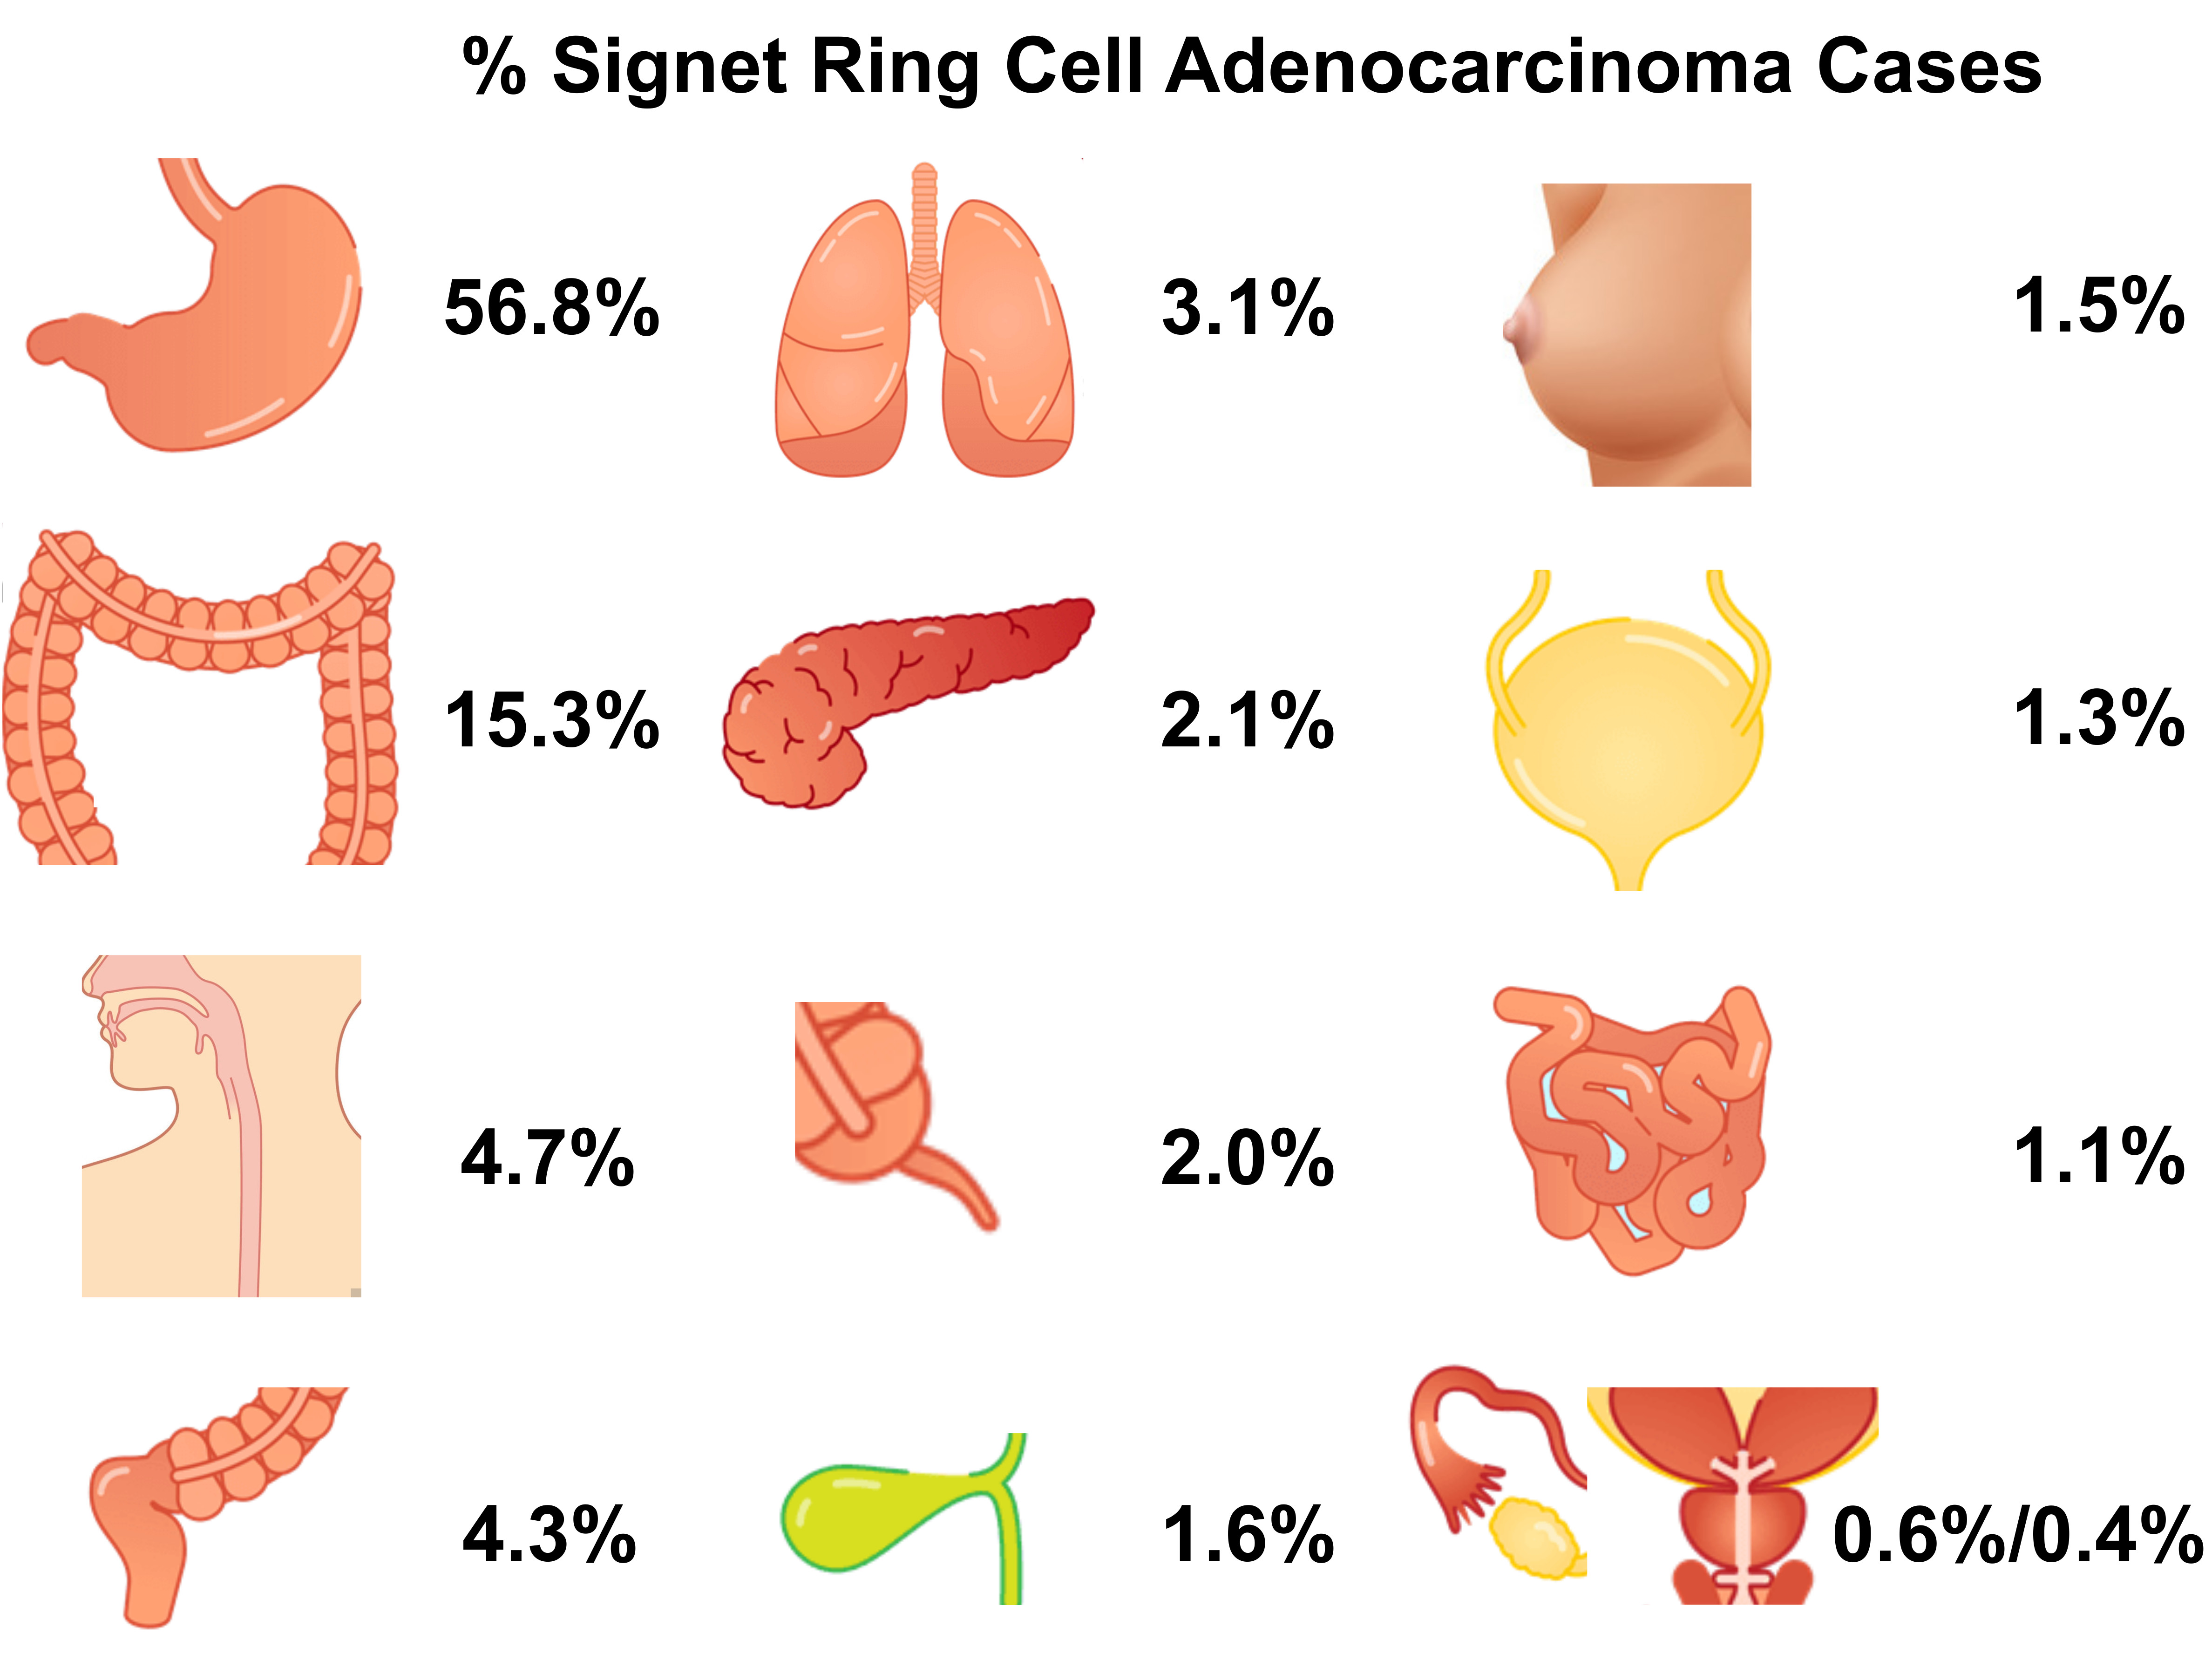 Composite signet-ring cell/neuroendocrine carcinoma of the stomach with a  metastatic neuroendocrine carcinoma component: a better prognosis entity |  Diagnostic Pathology | Full Text